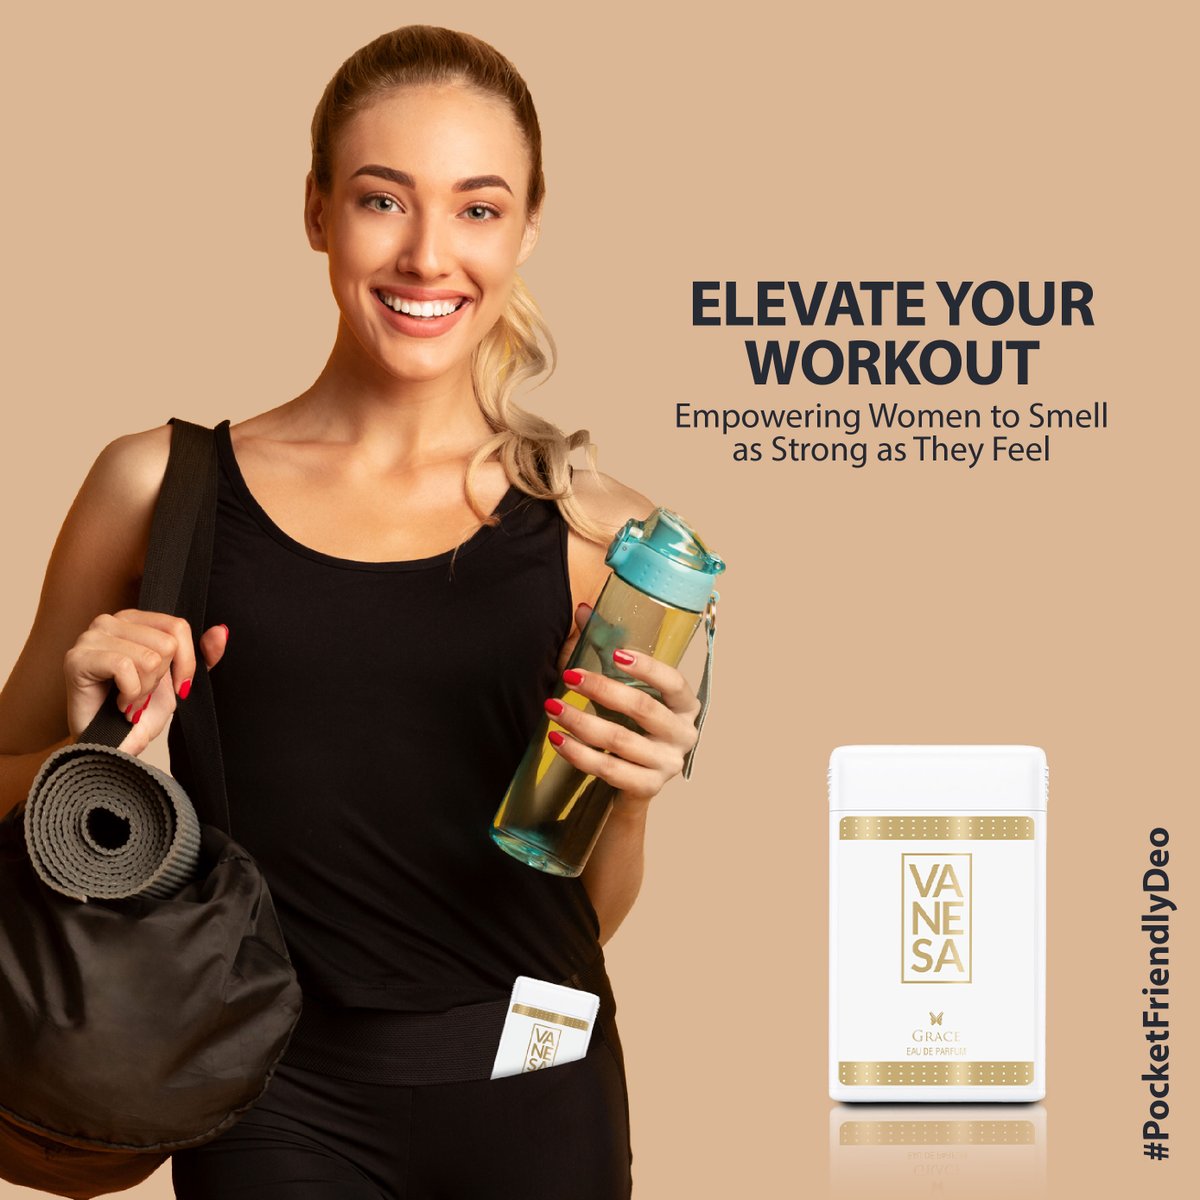 Transform your workout into an invigorating experience with Vanesa pocket perfume. Designed for women who believe in the power of persistence. #VanesaPerfumes #vanesabeauty #Vanesa #Grace #Perfume #GracePerfume #vanesaPerfume #Fragrance #BodyDeo #deodorant #vanesabody